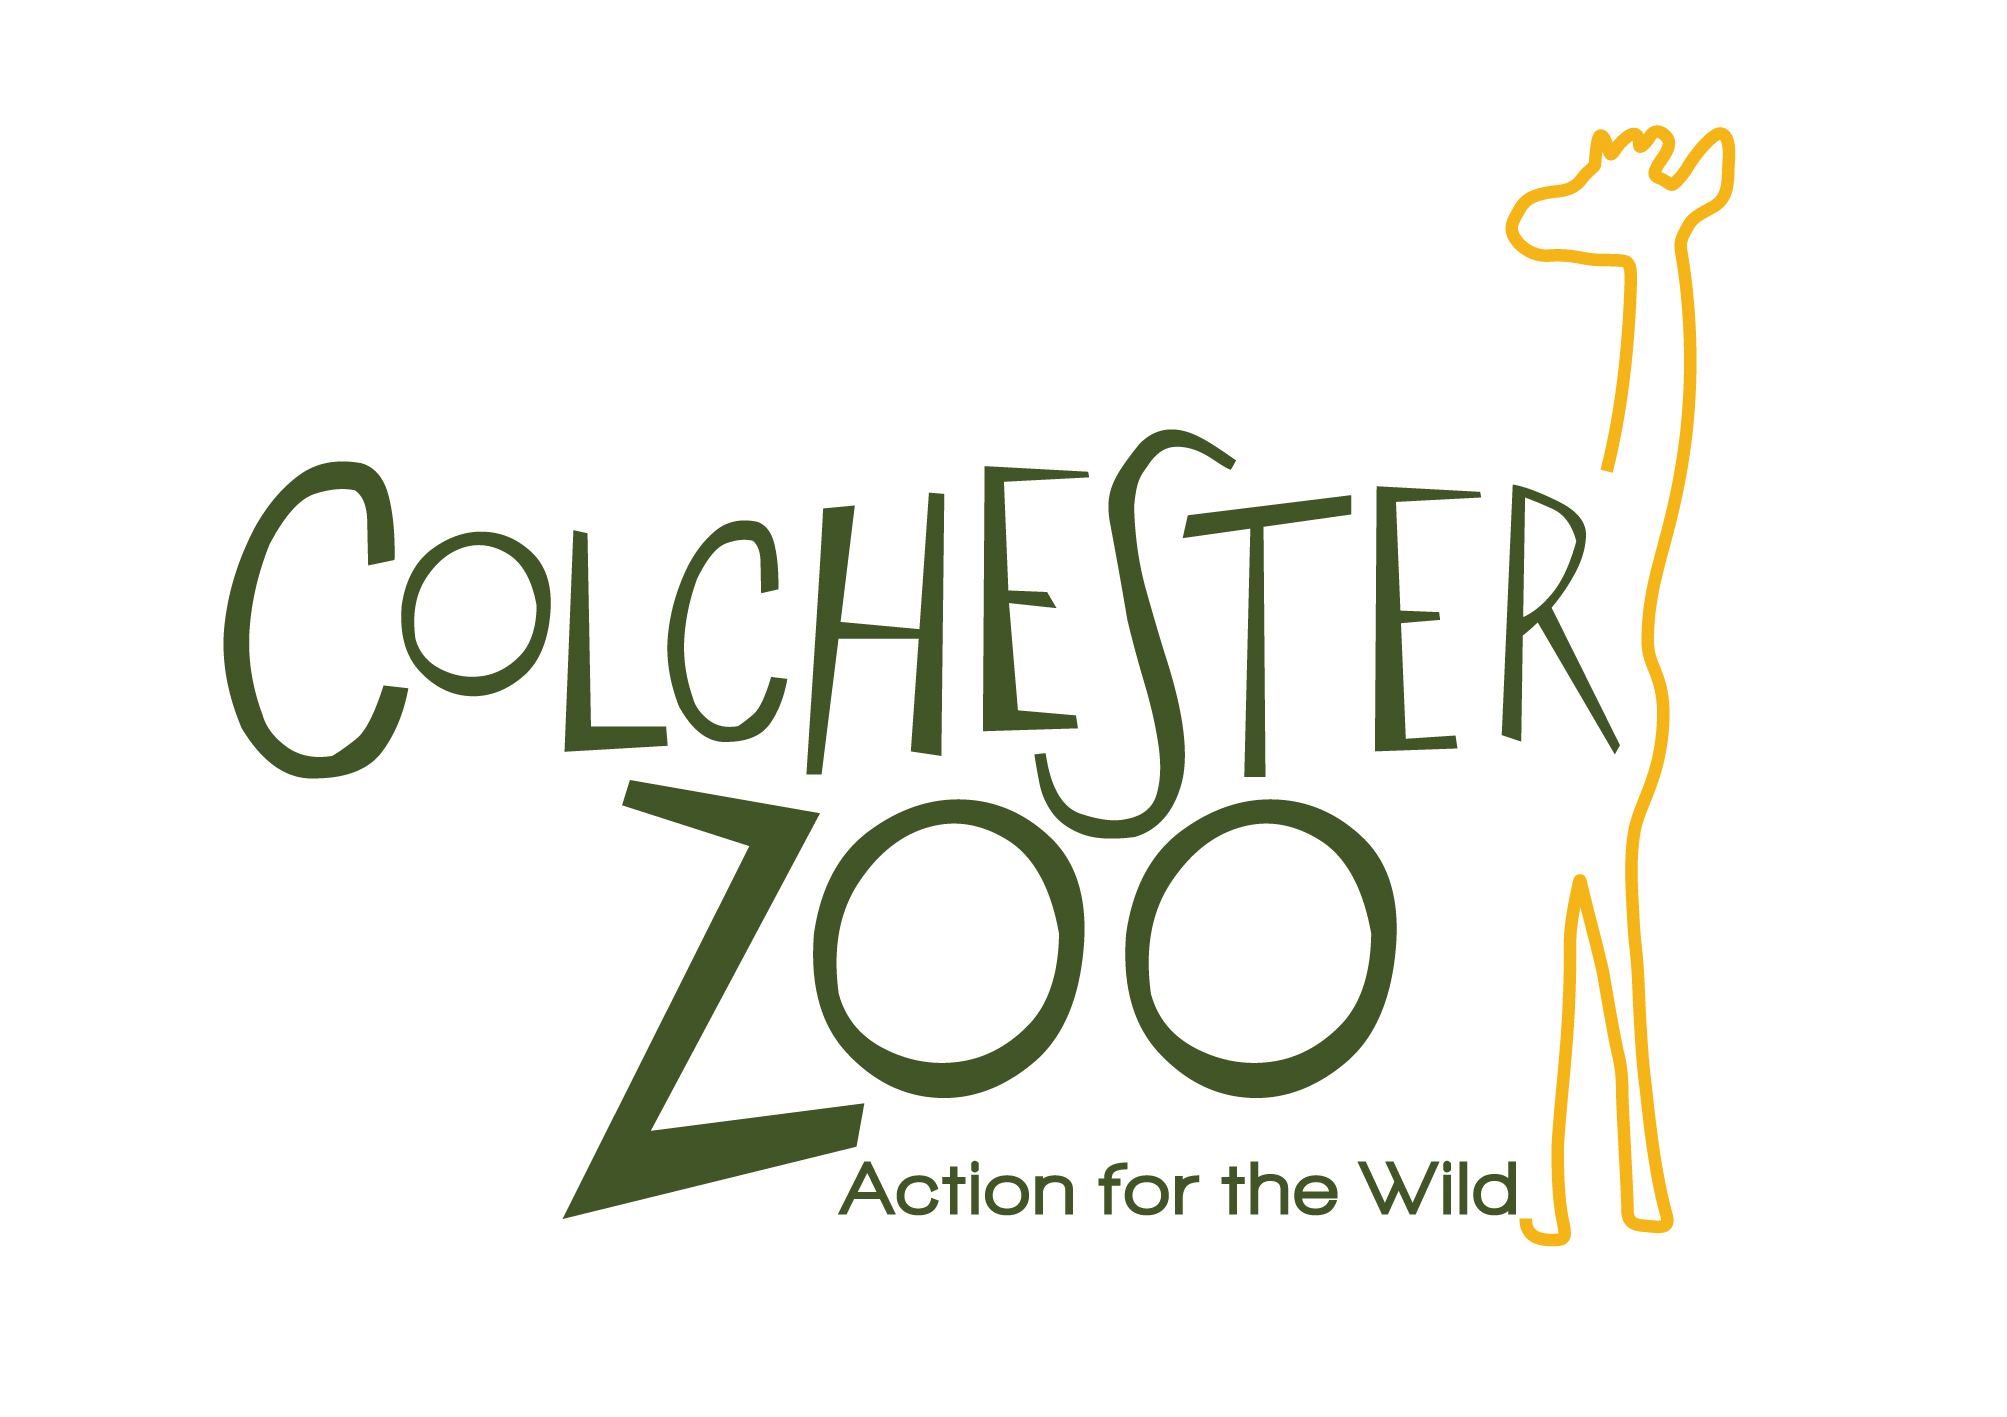 Colchster Zoo logo Green and gold aftw.jpg